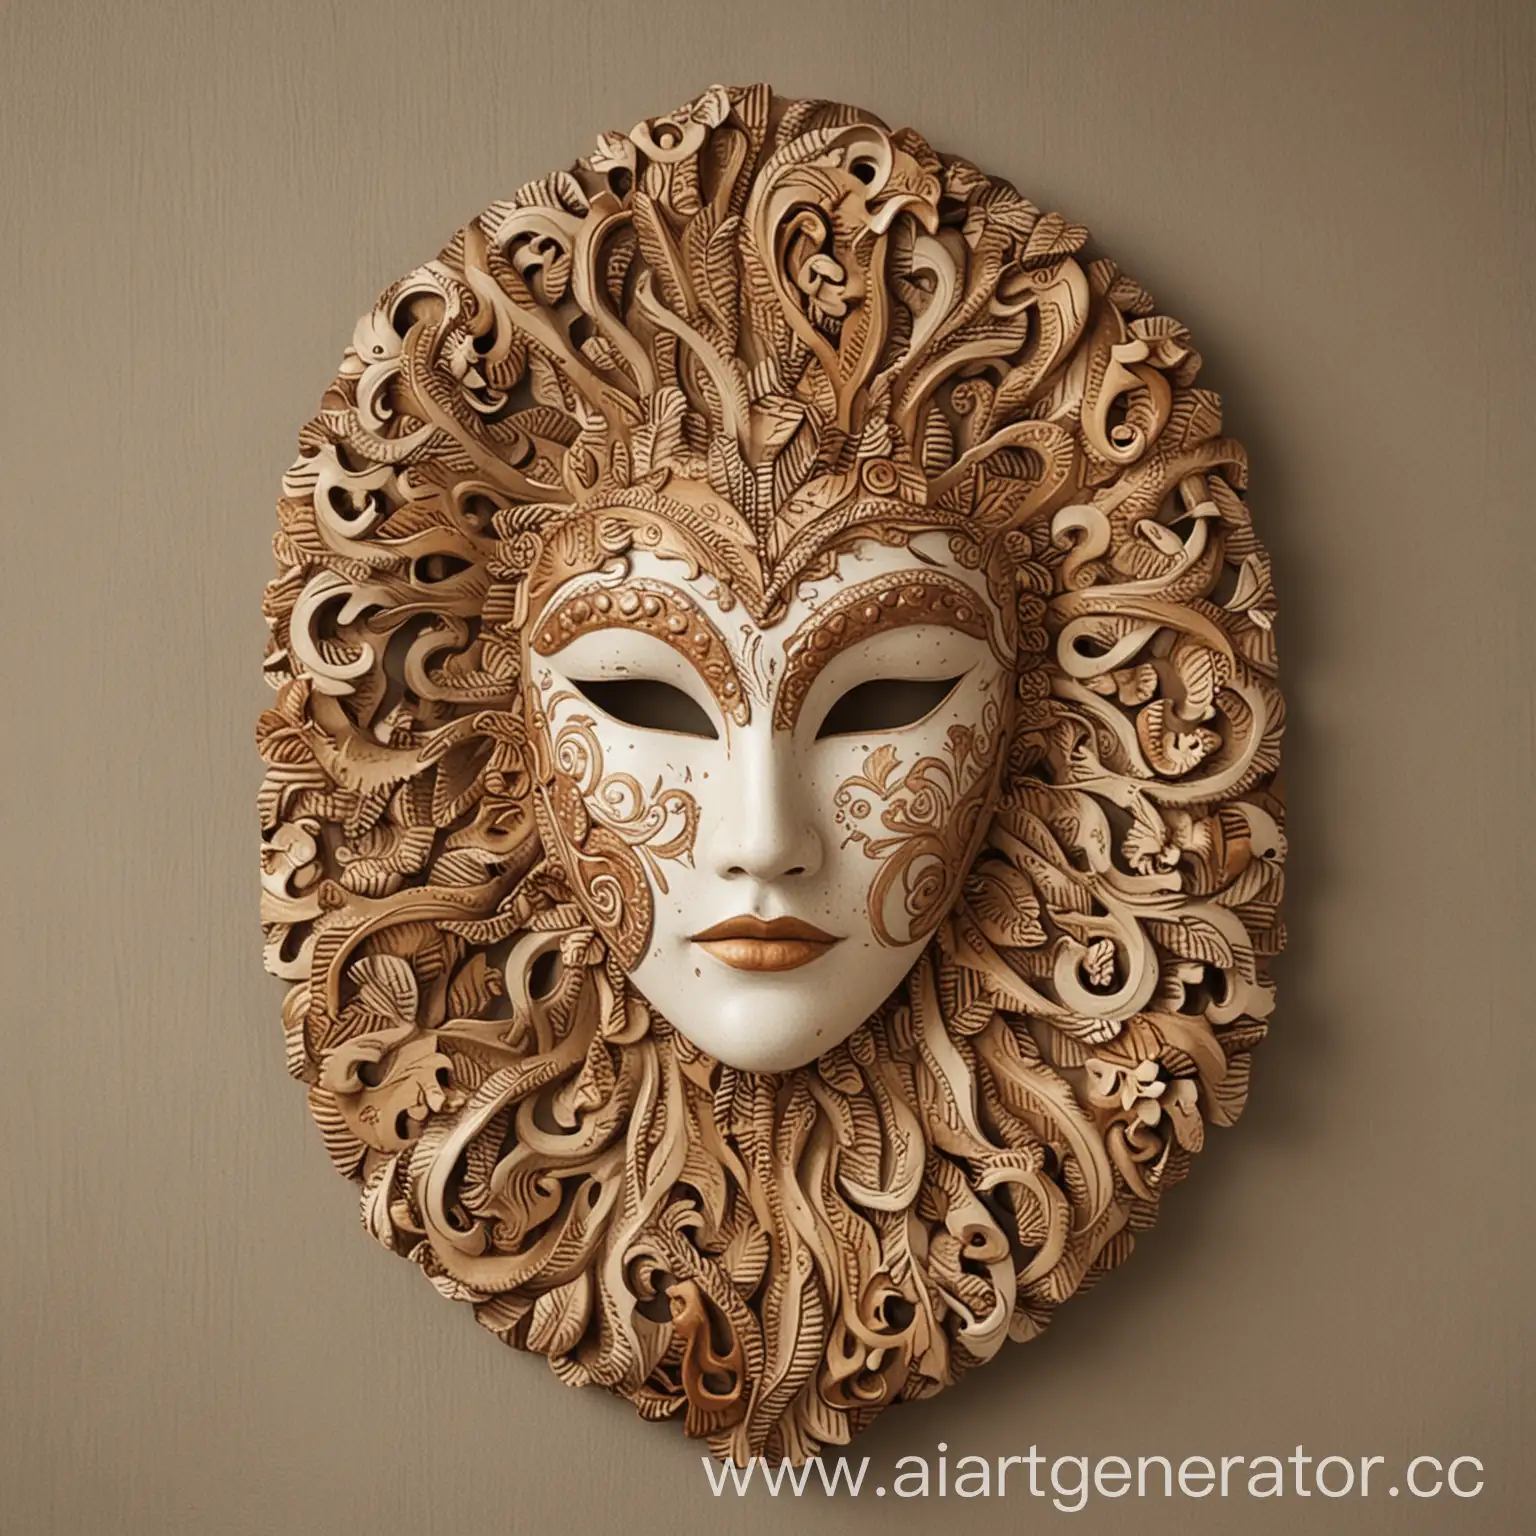 Warmth-and-Kindness-in-Decorative-Wall-Mask-Art